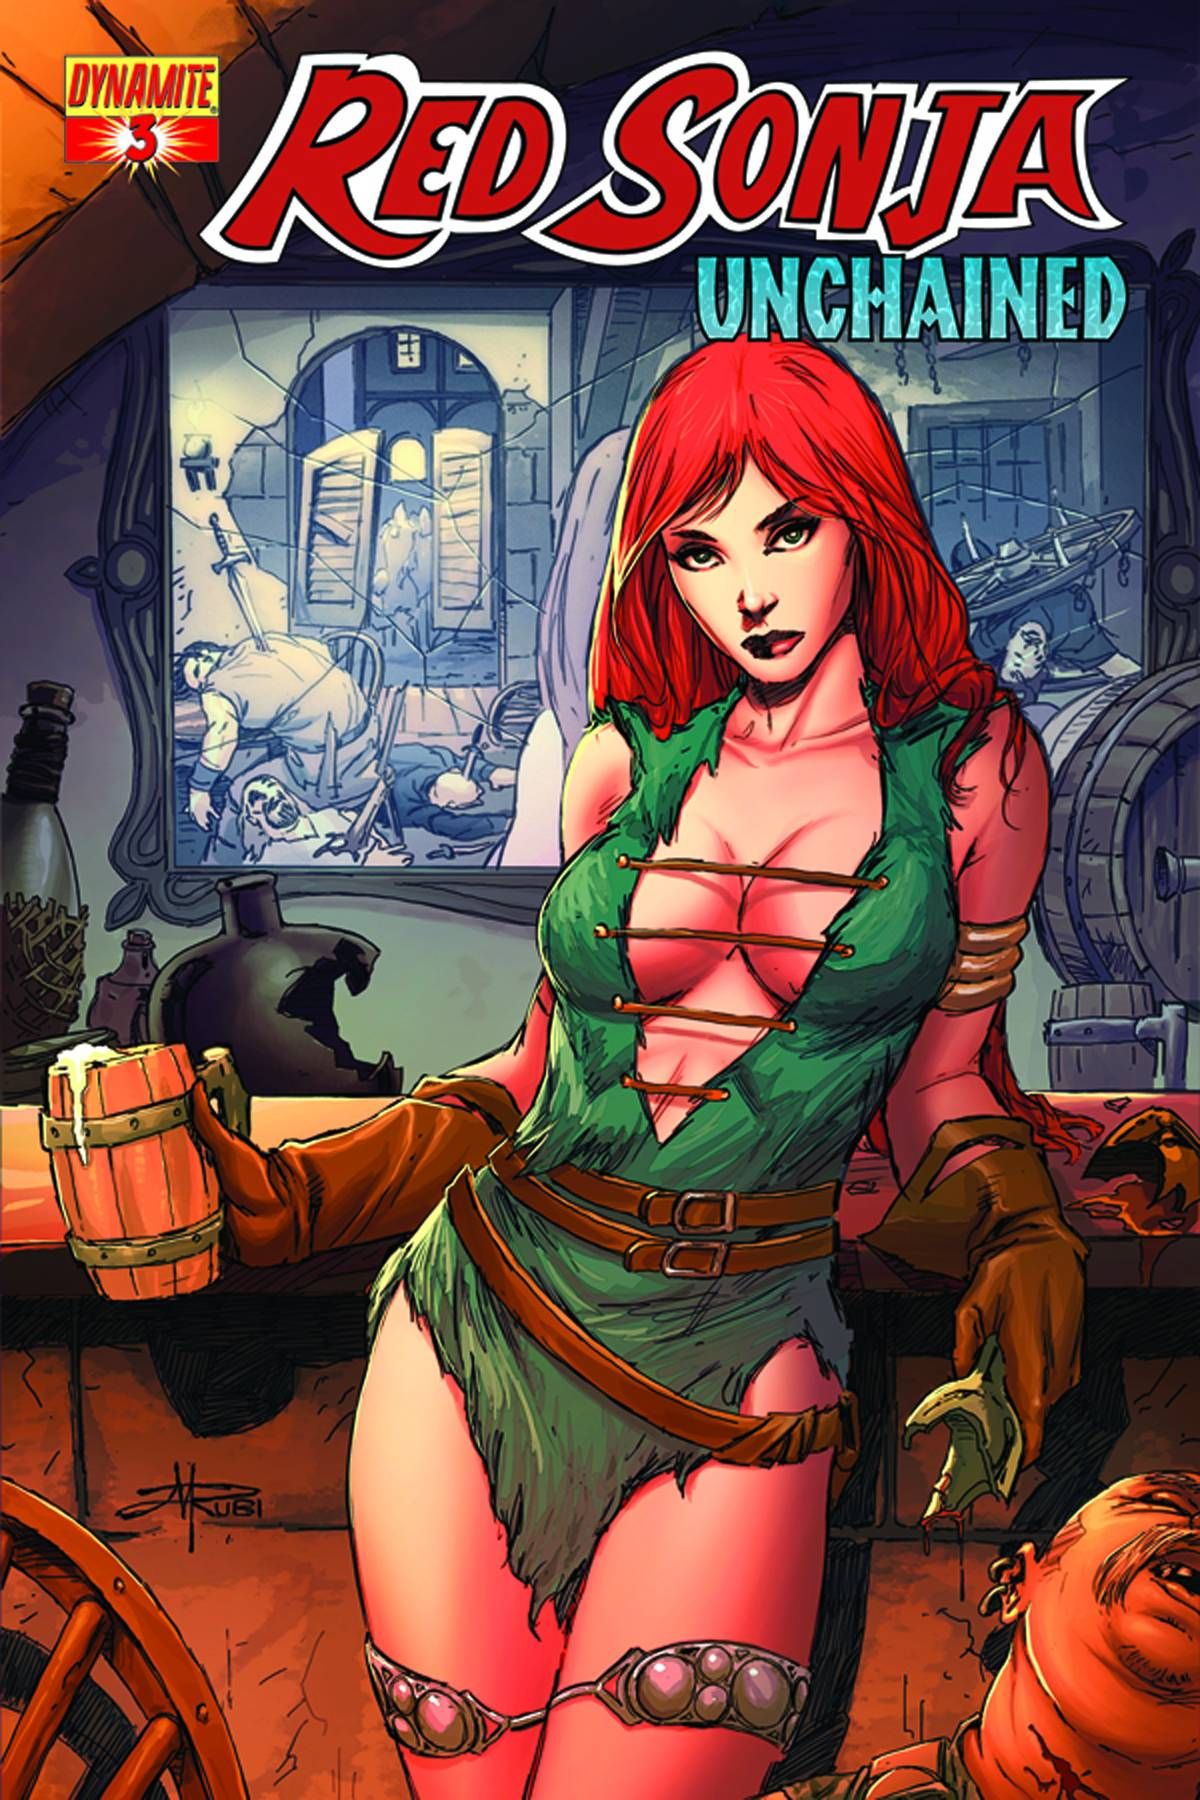 Red Sonja Unchained #3 Comic